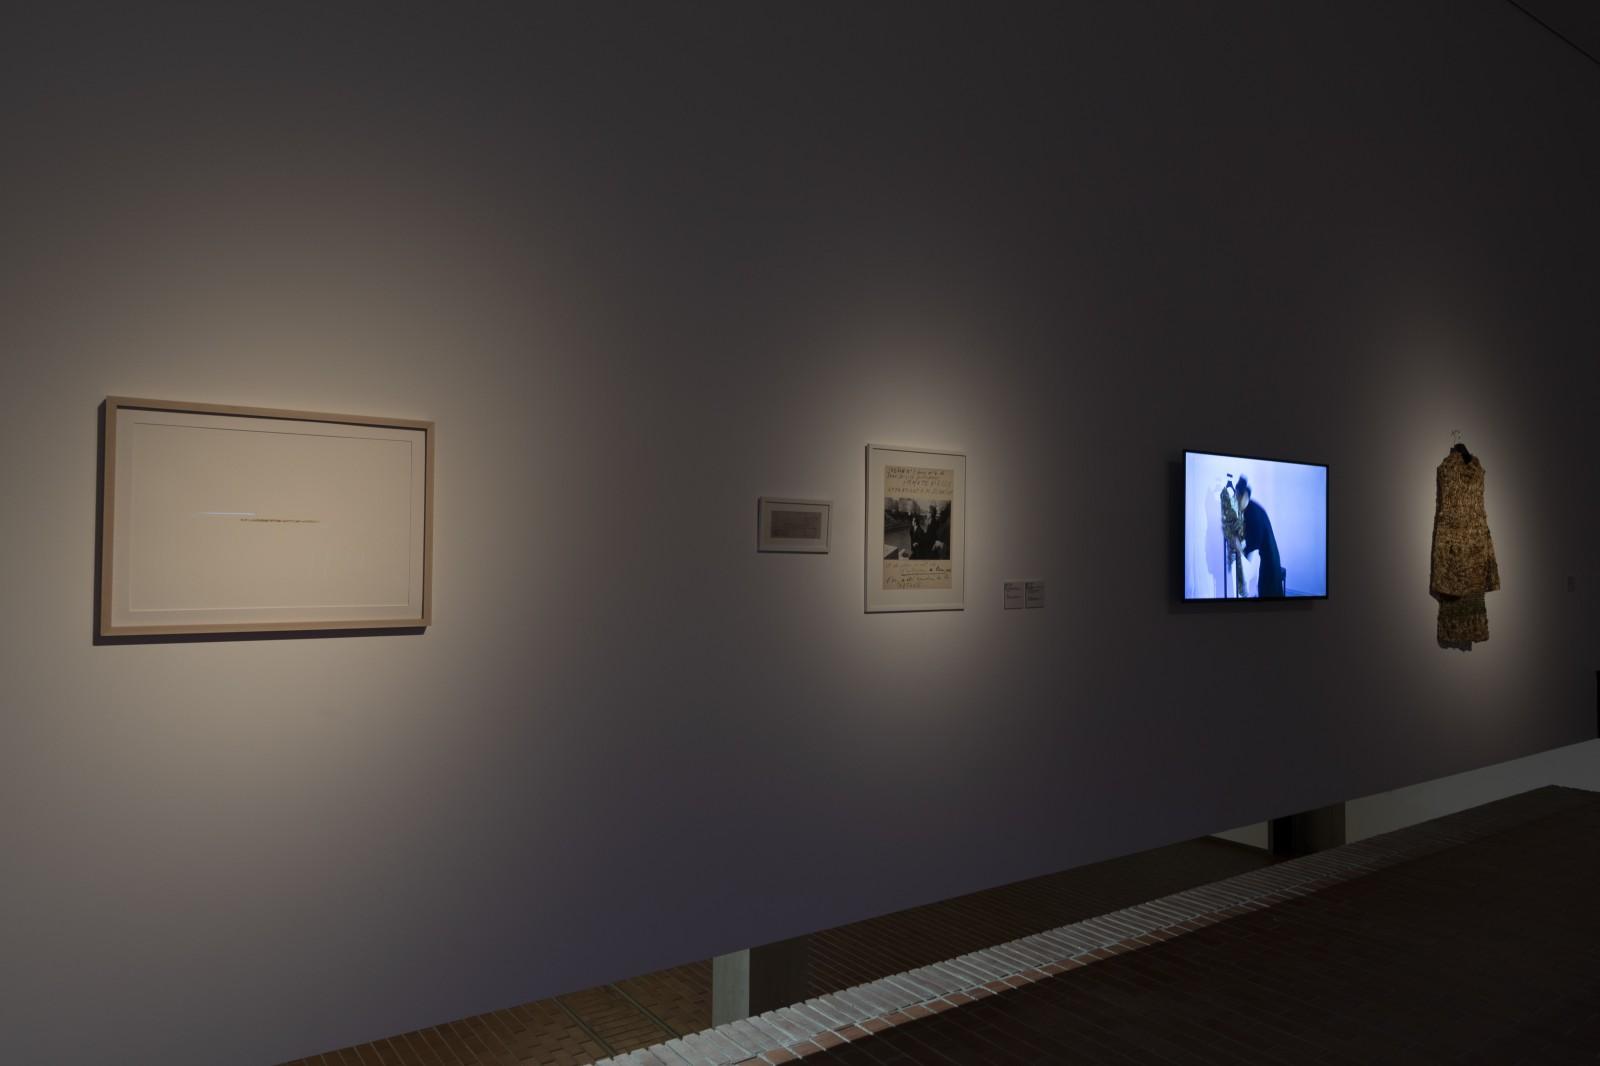 View of the exhibition "The supermarket of images", Red Brick Art Museum, Beijing, 2021